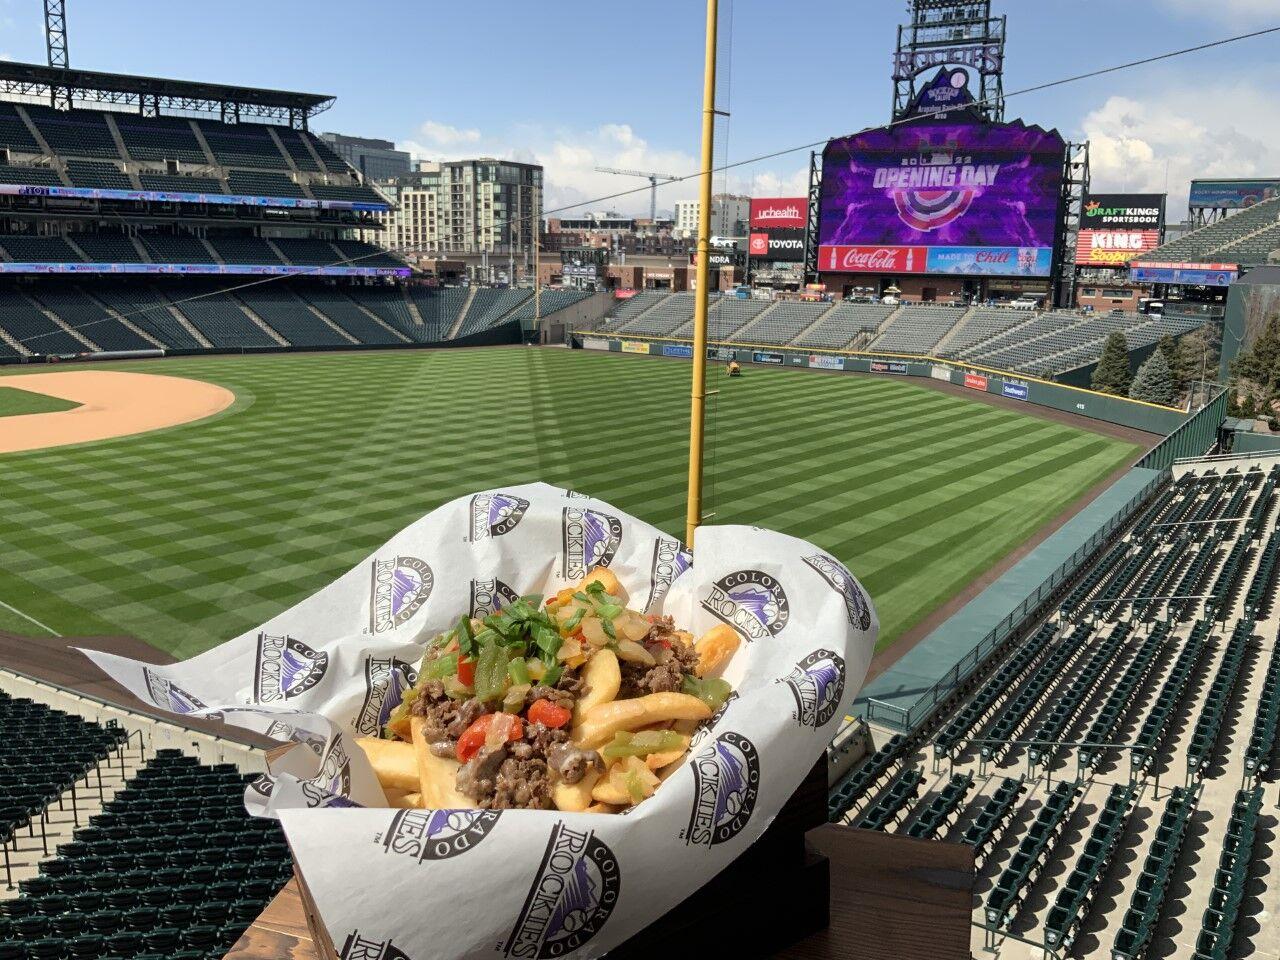 Colorado Rockies: Some facts you nay not know about Coors Field